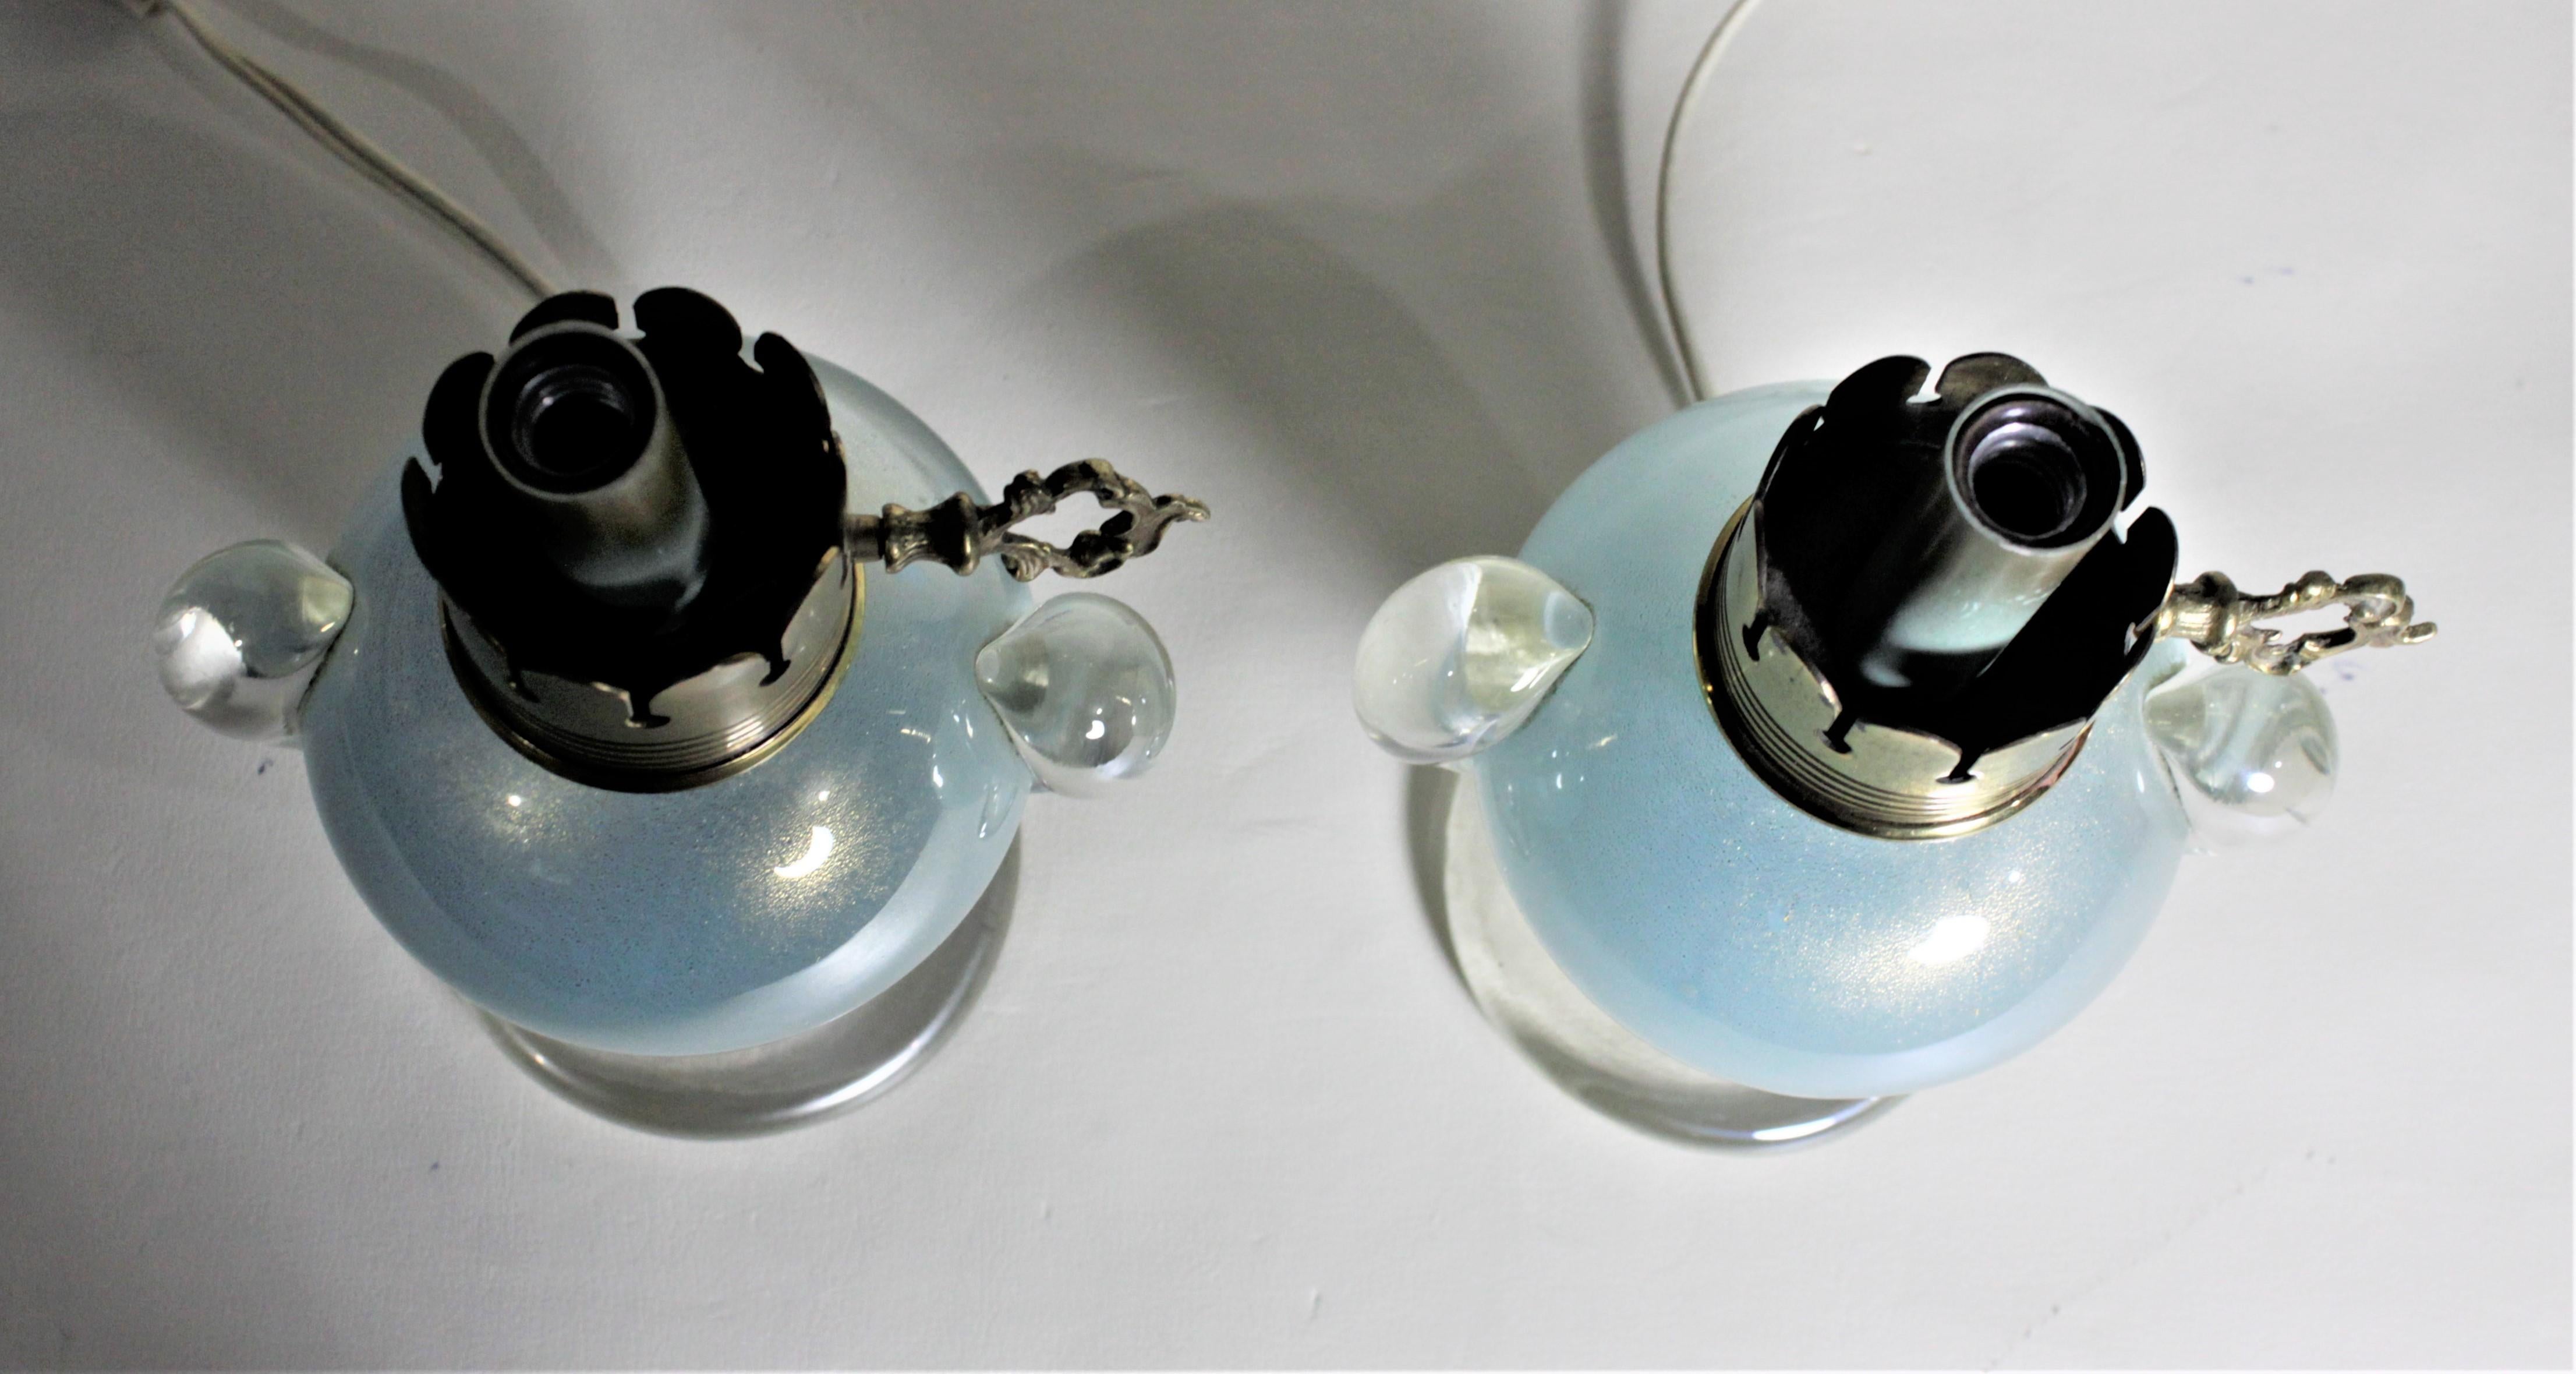 Pair of Vintage Murano Lantern Styled Art Glass Table or Bedroom Accent Lamps In Good Condition For Sale In Hamilton, Ontario